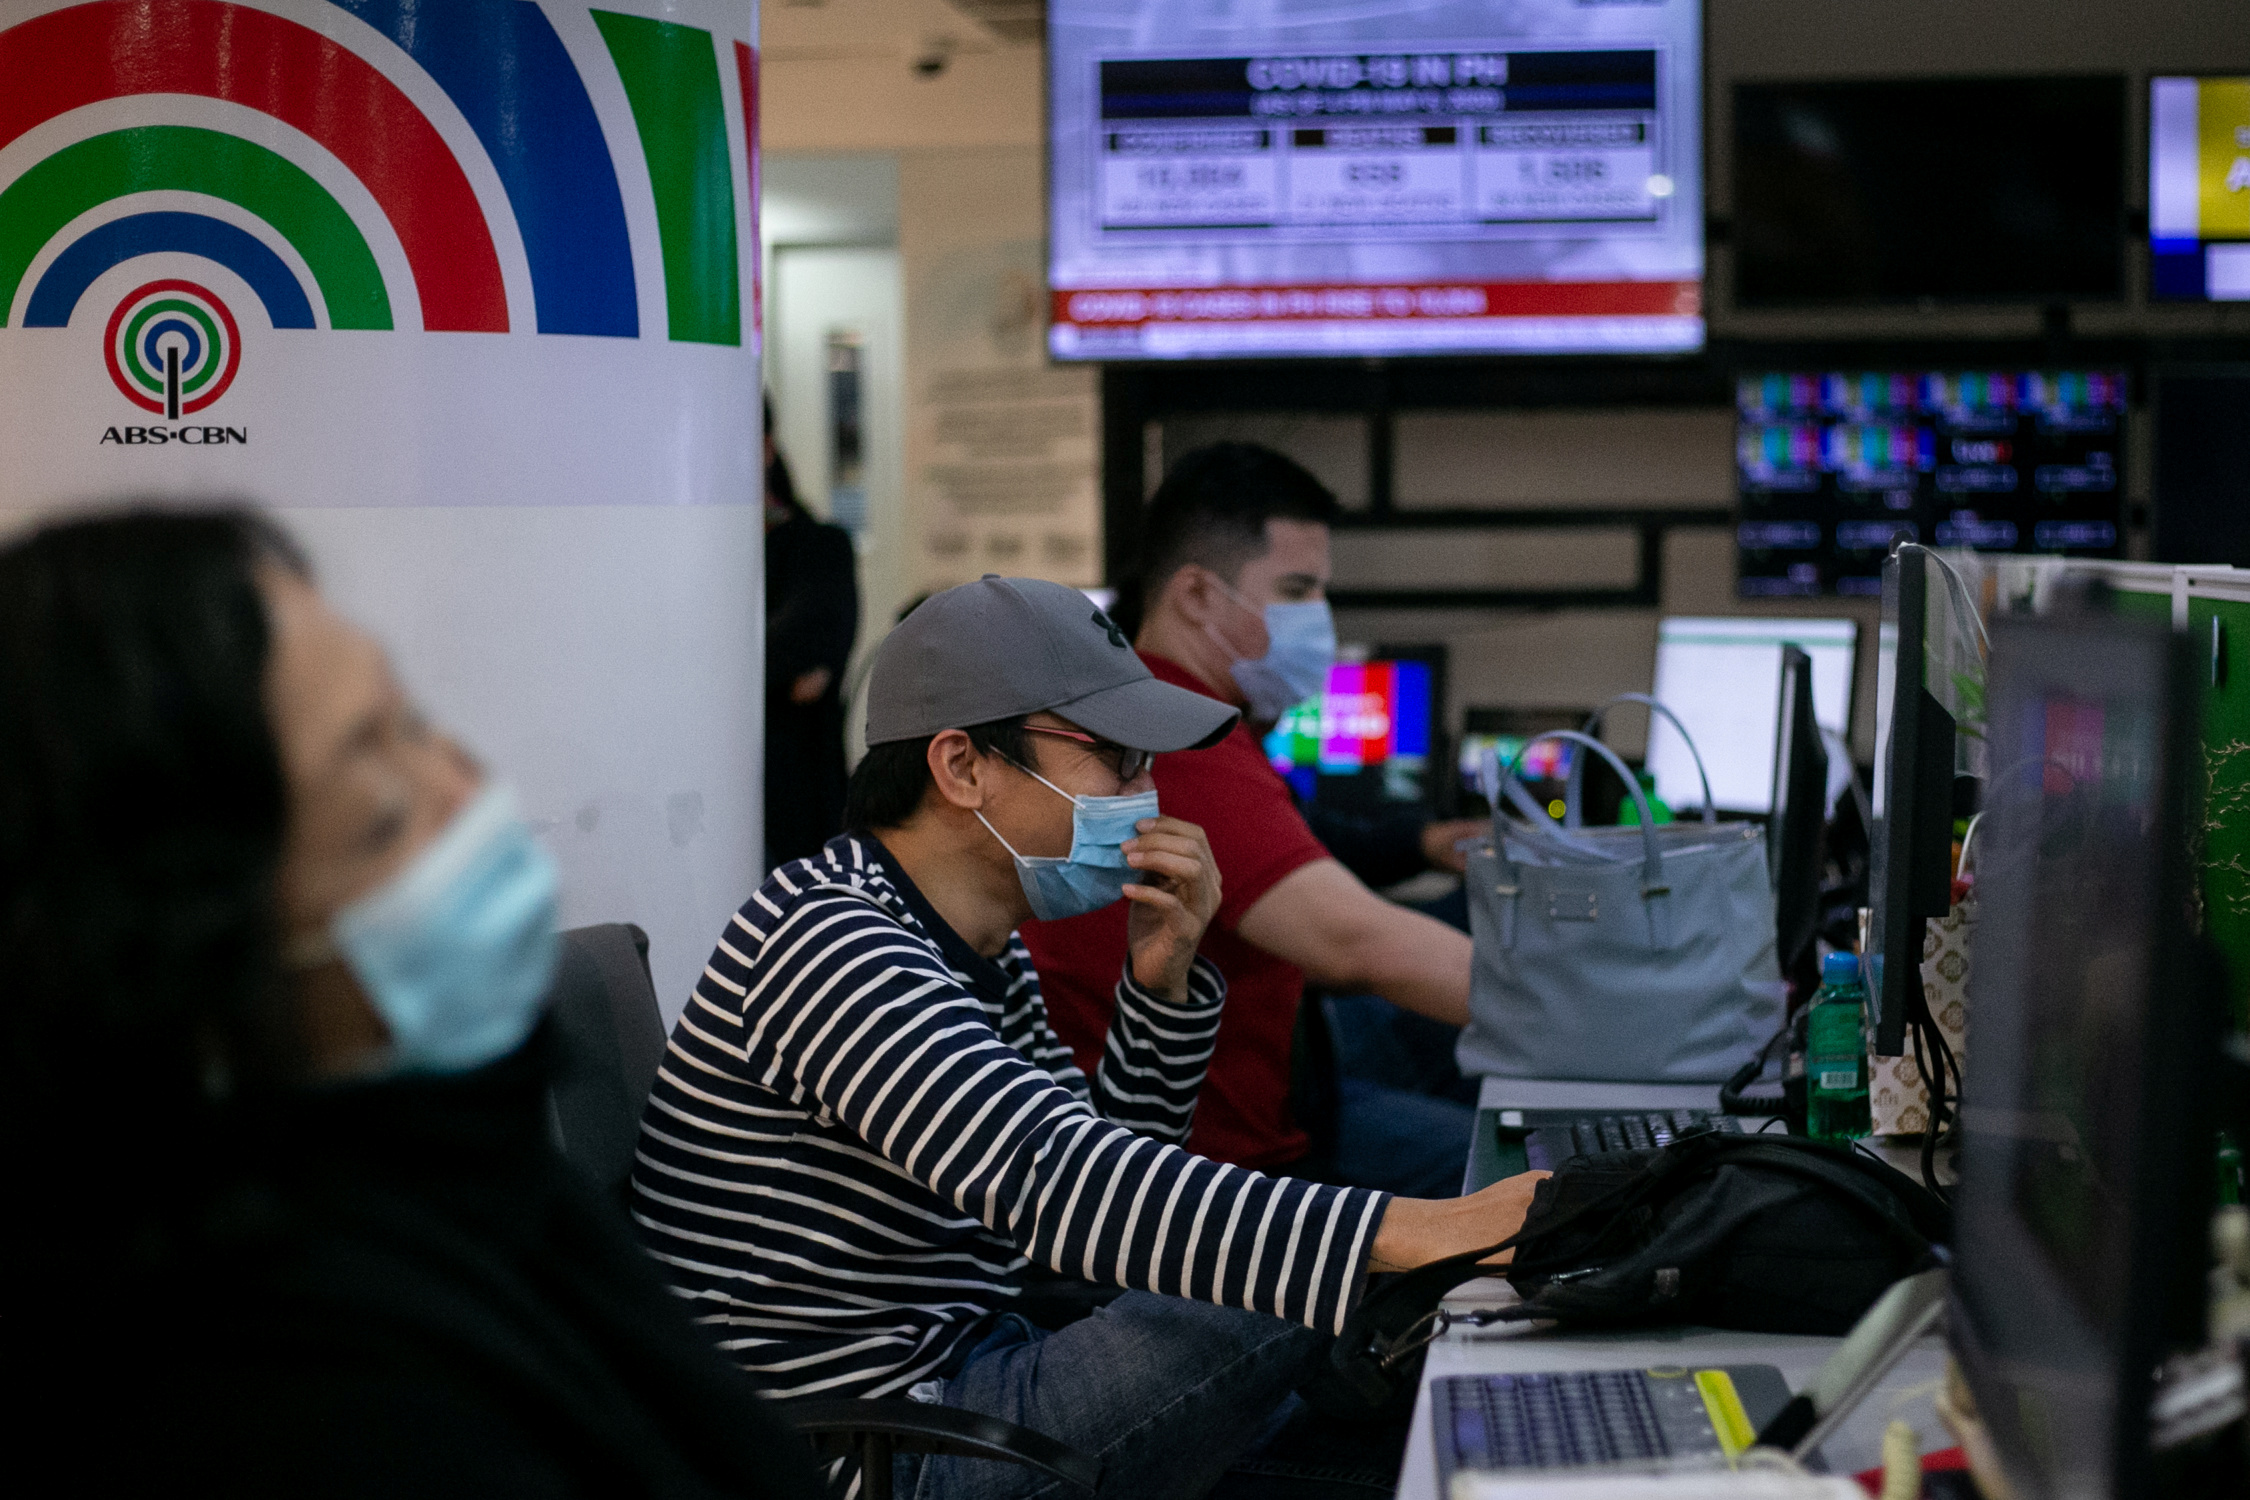 Writers and editors of ABS-CBN, the country’s biggest broadcaster, work at the newsroom in their headquarters, following orders by telecoms regulator to cease its operations in Quezon City, Metro Manila, Philippines, May 6, 2020. REUTERS/Eloisa Lopez